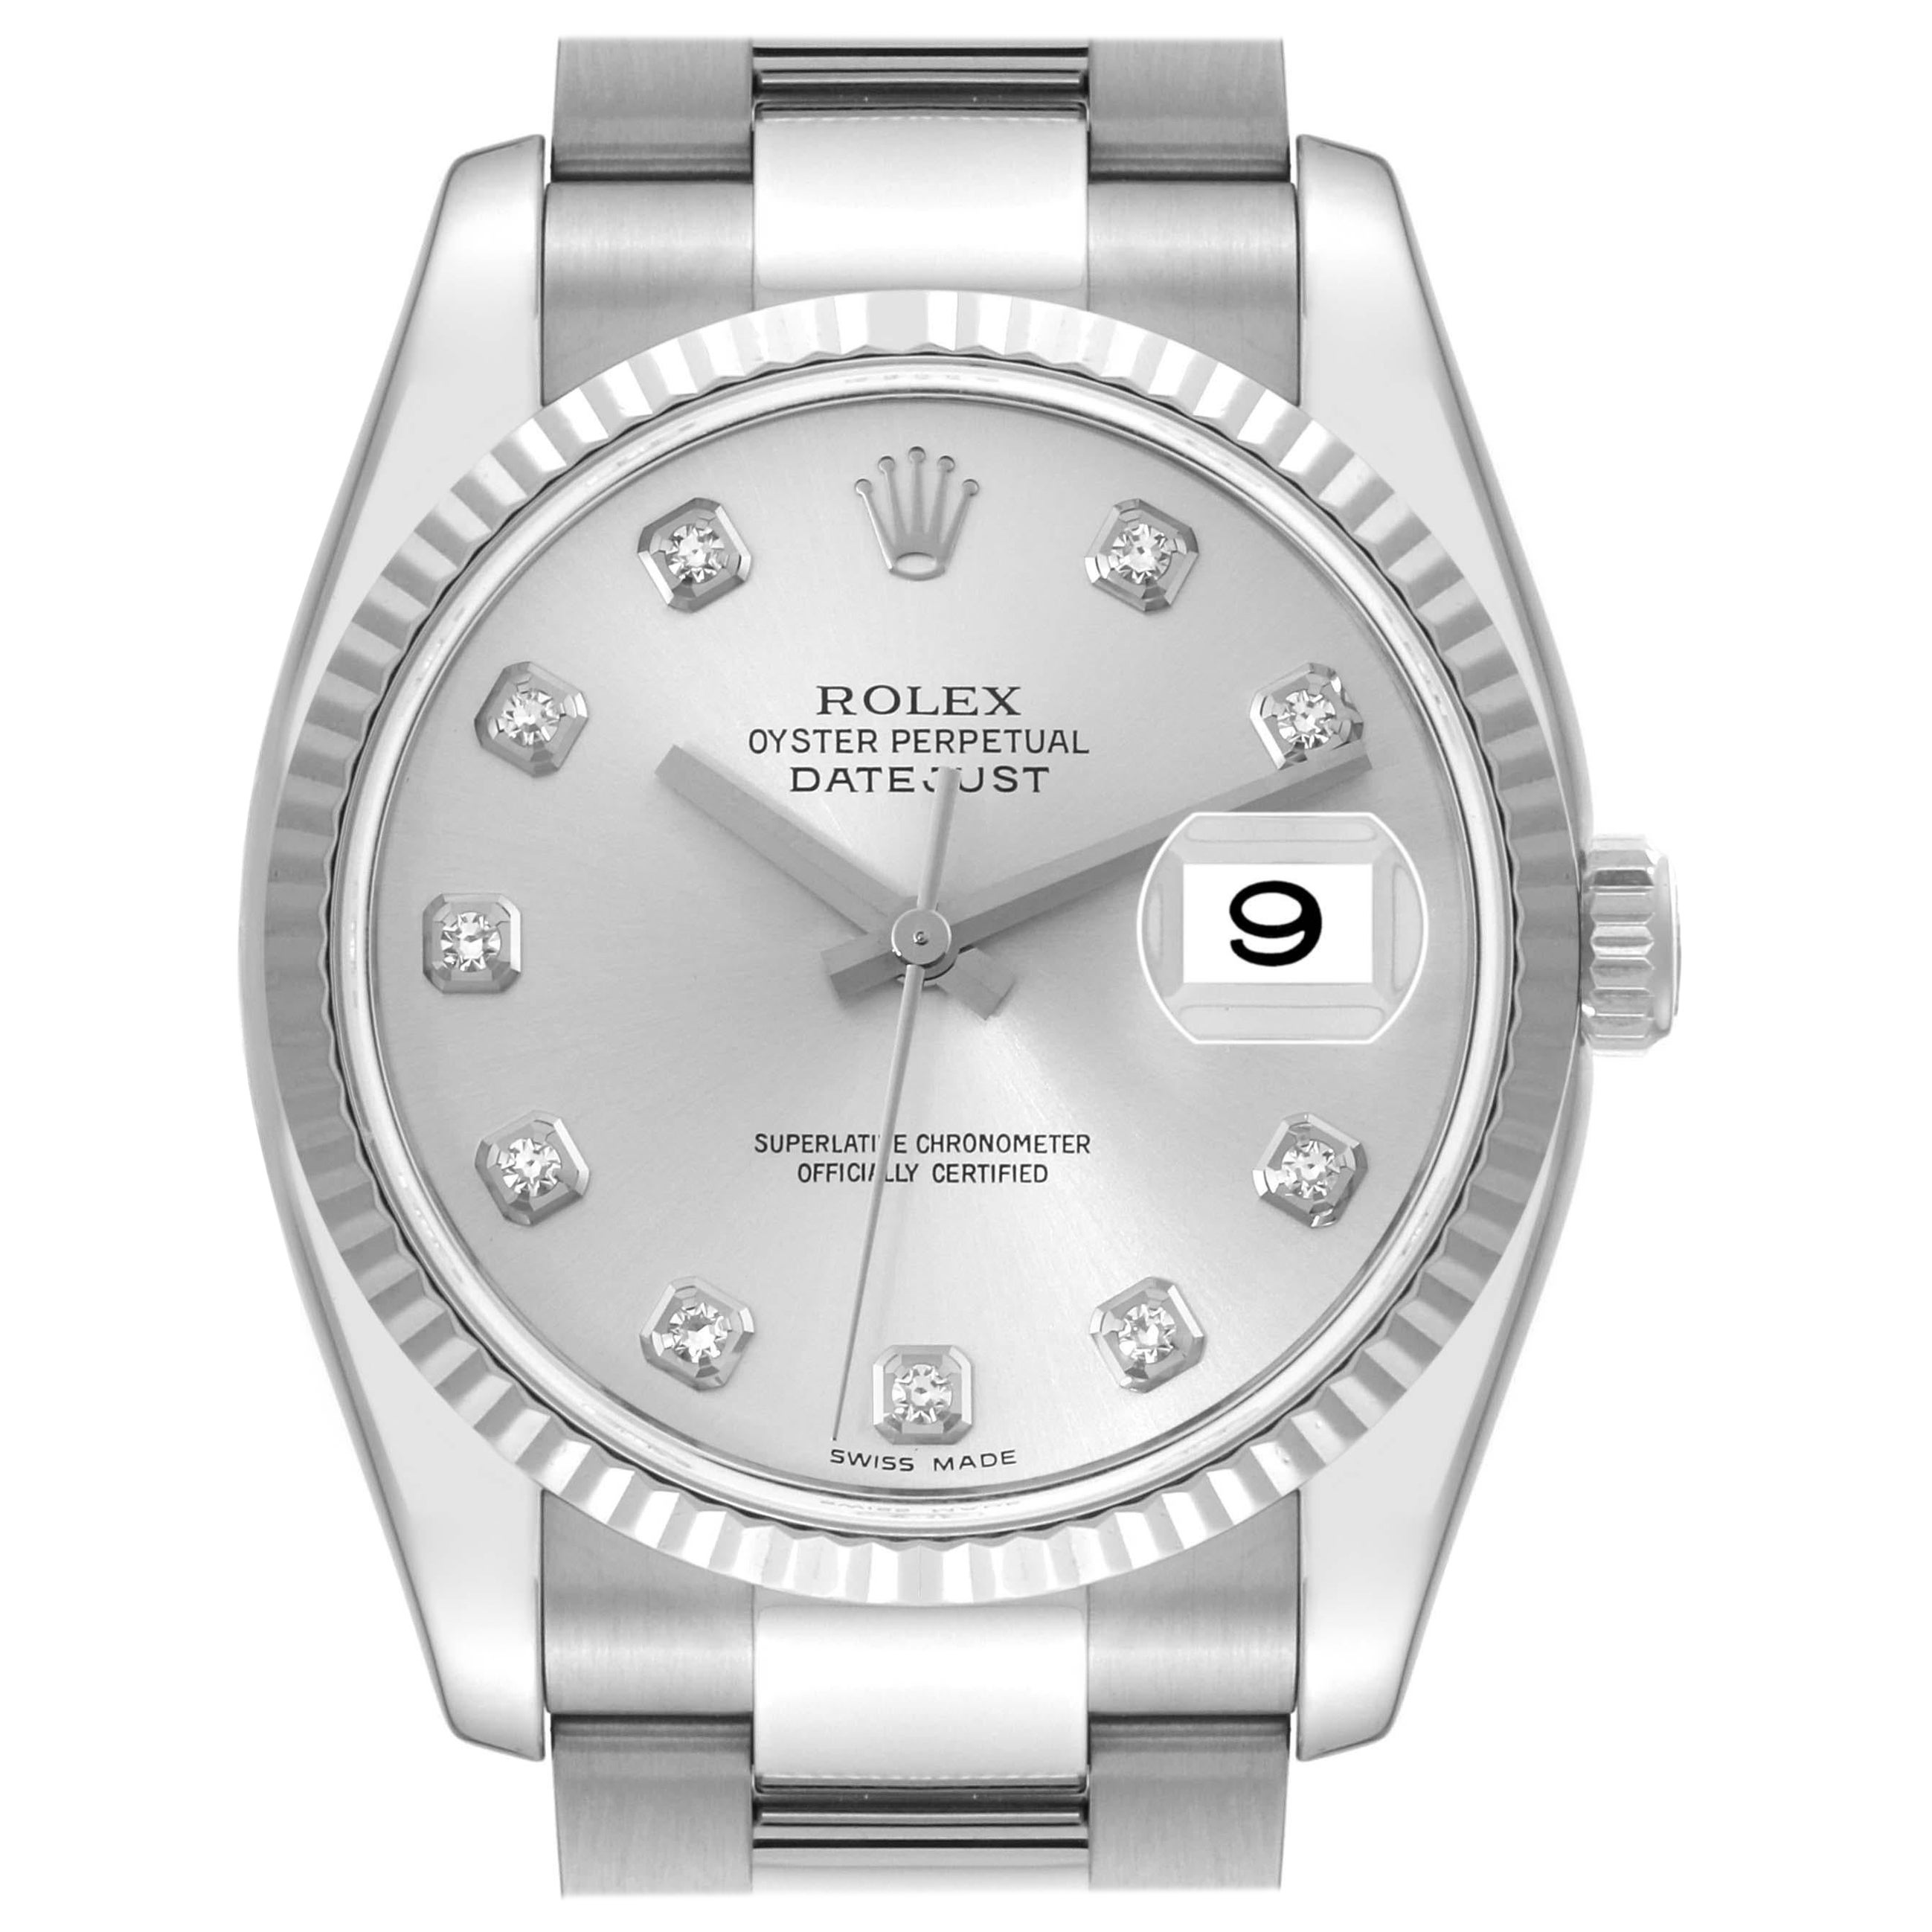 Rolex Datejust Steel White Gold Silver Diamond Dial Mens Watch 116234 Papers For Sale